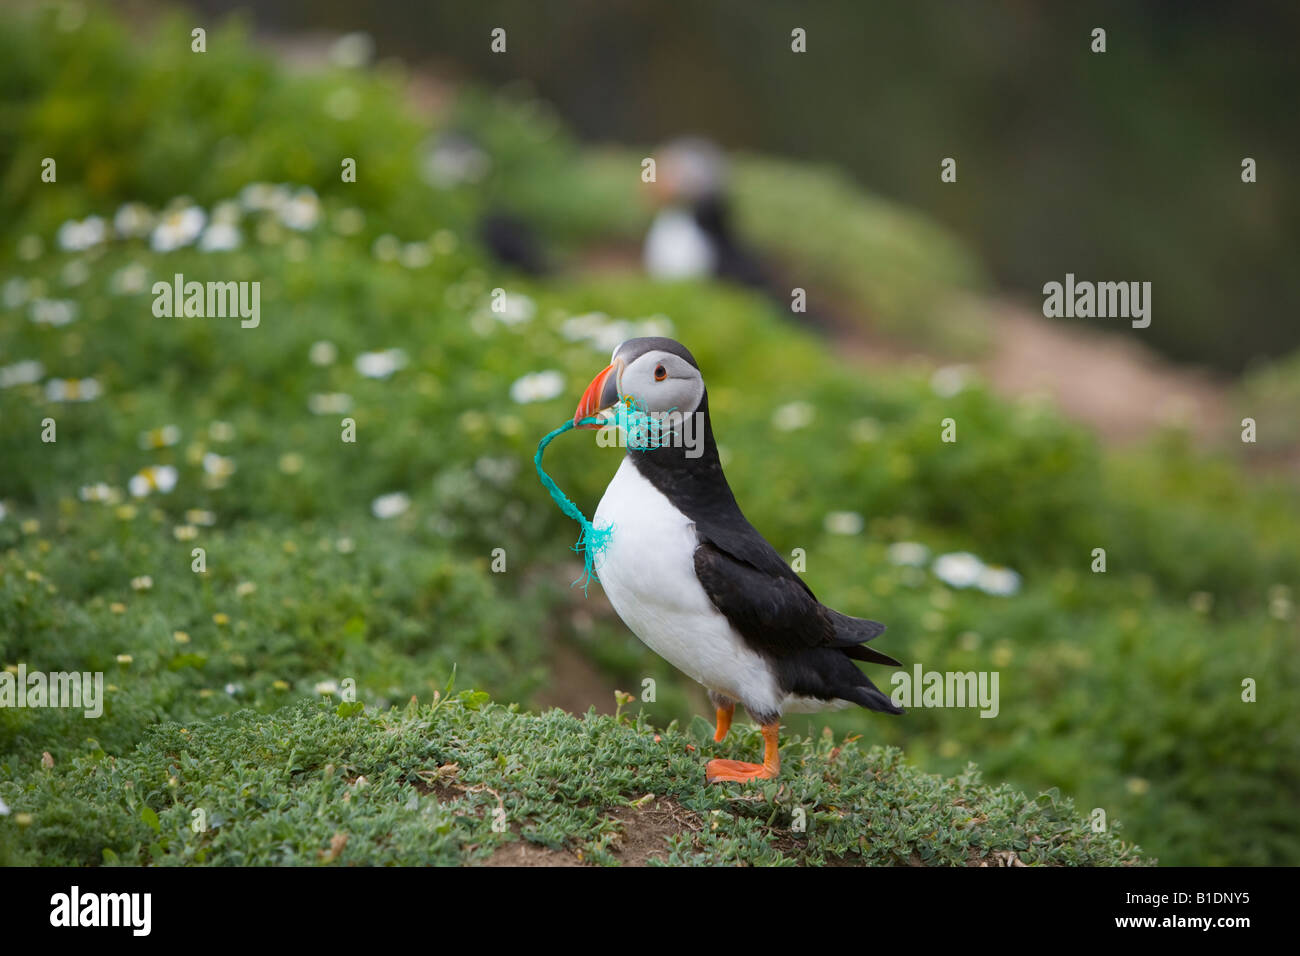 Puffin nest building Stock Photo